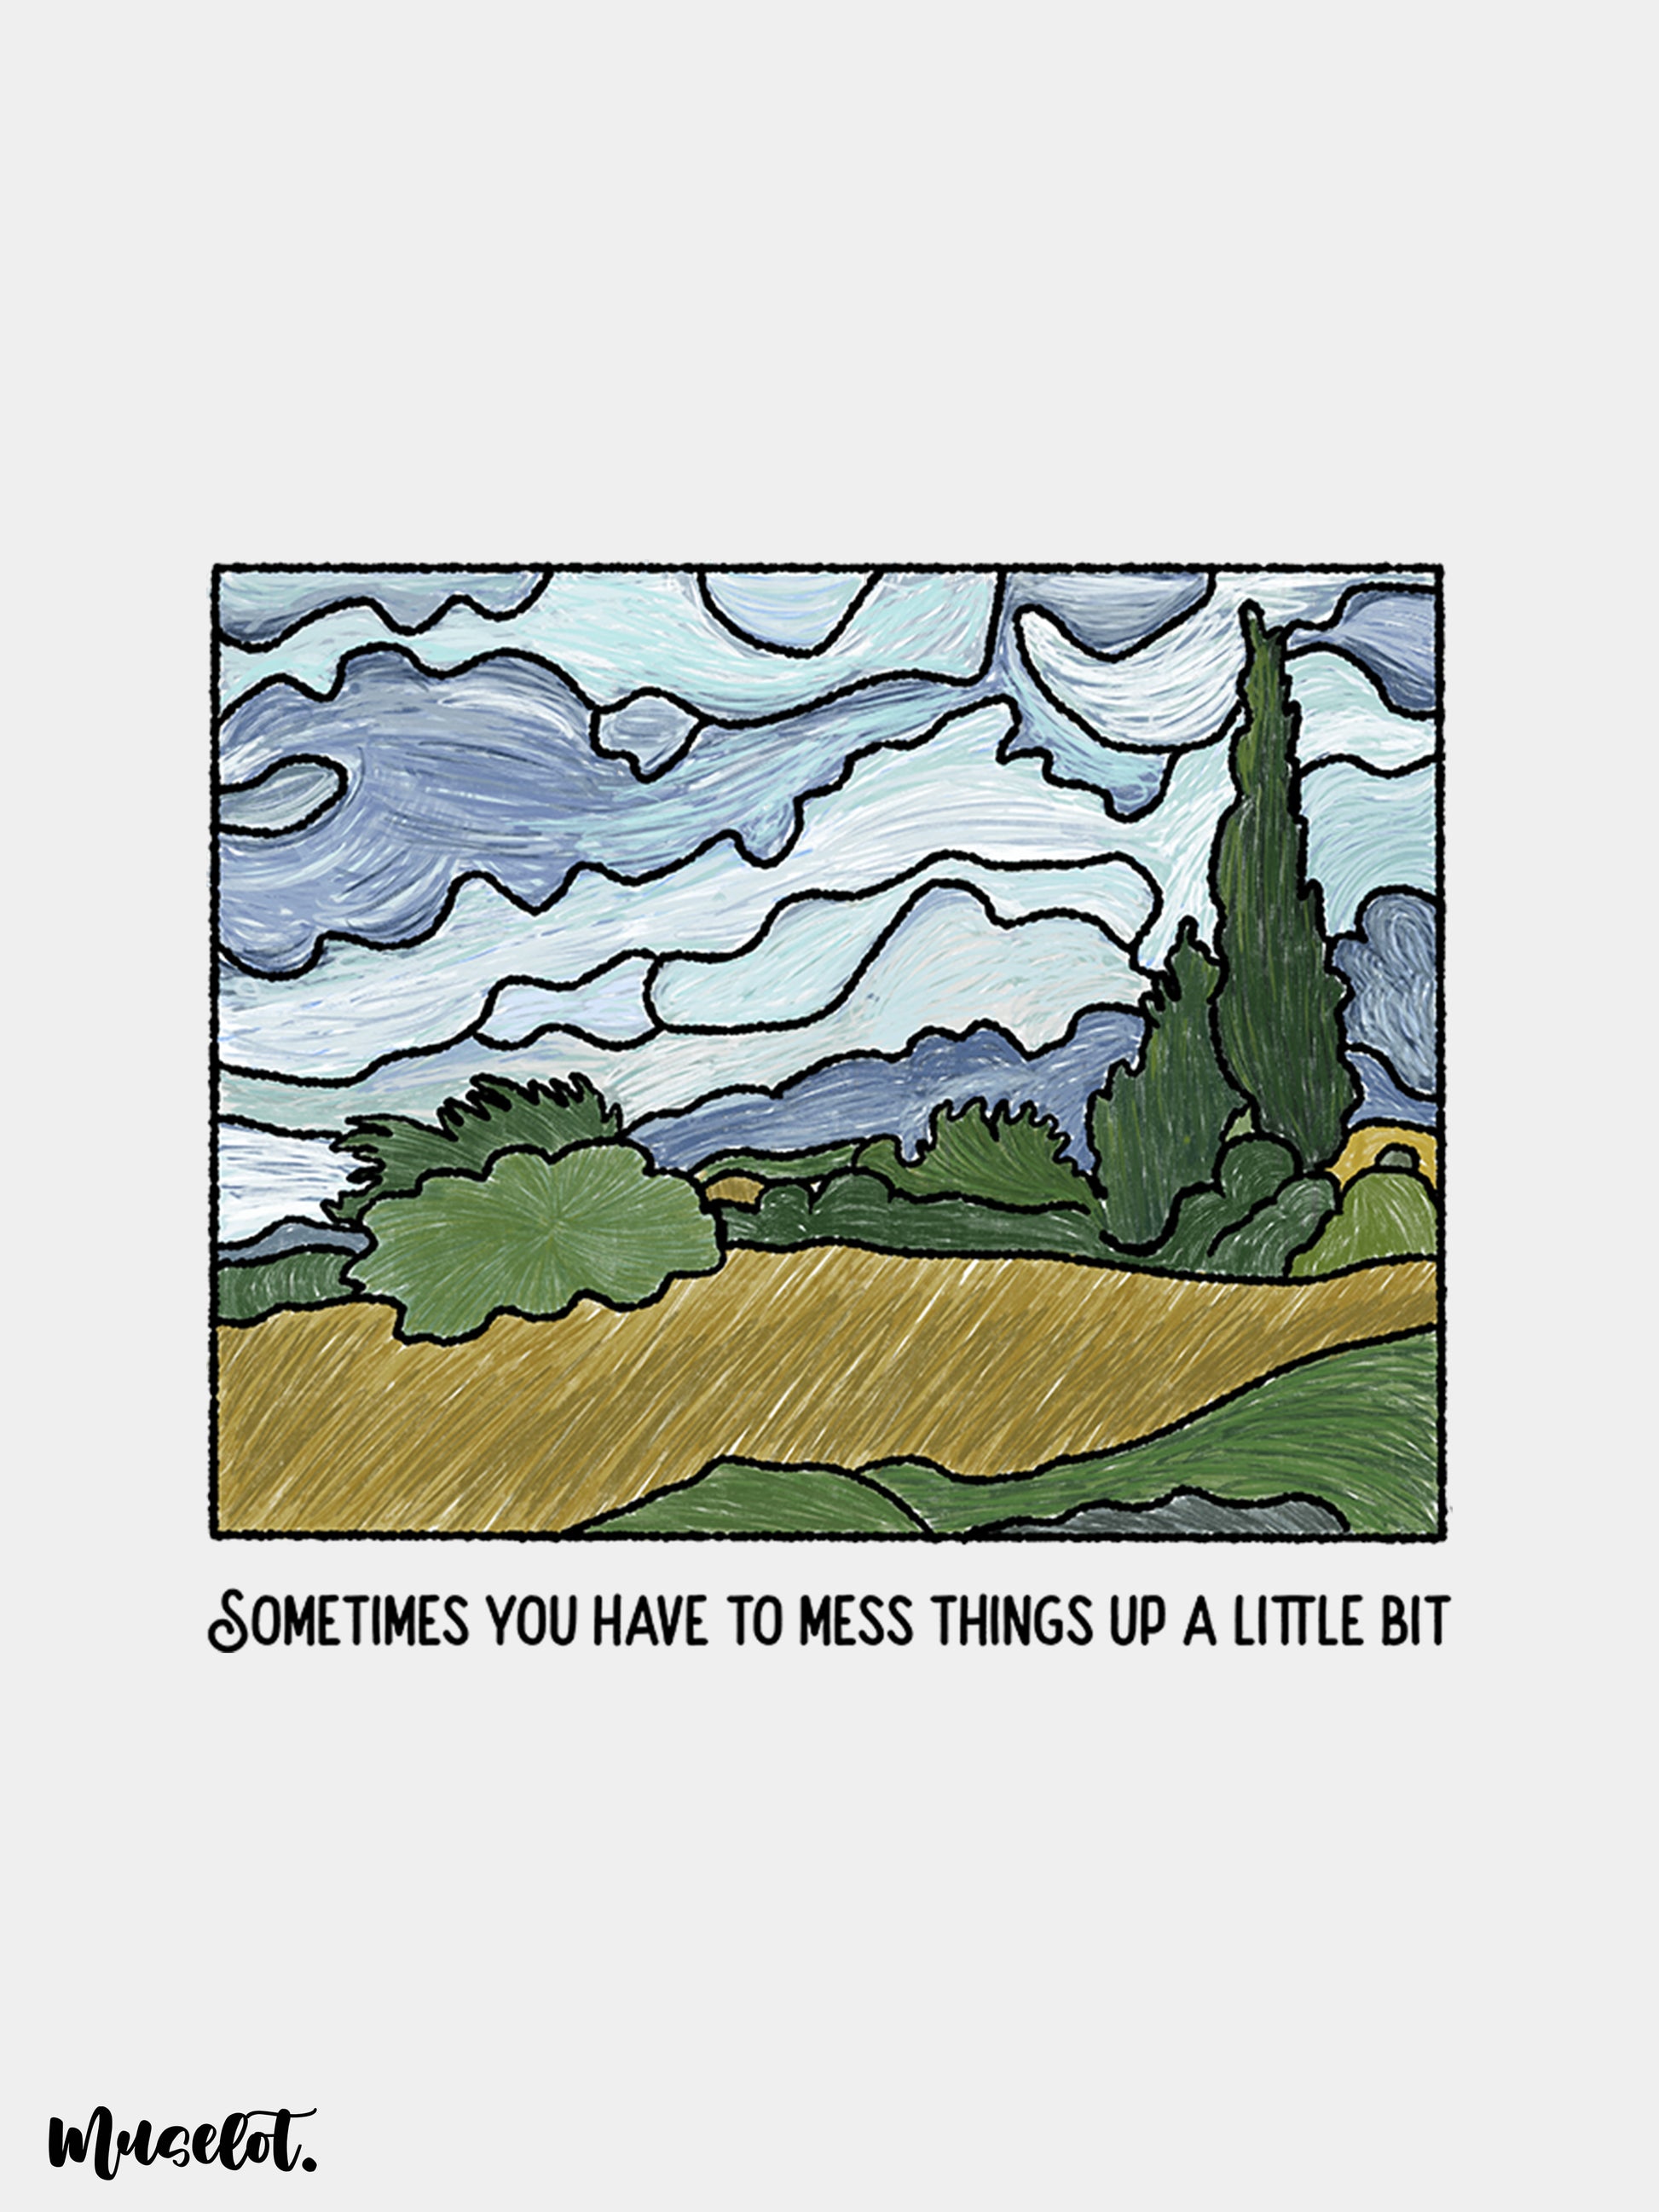 Sometimes you have to mess things up a little bit design illustration for art lovers at Muselot